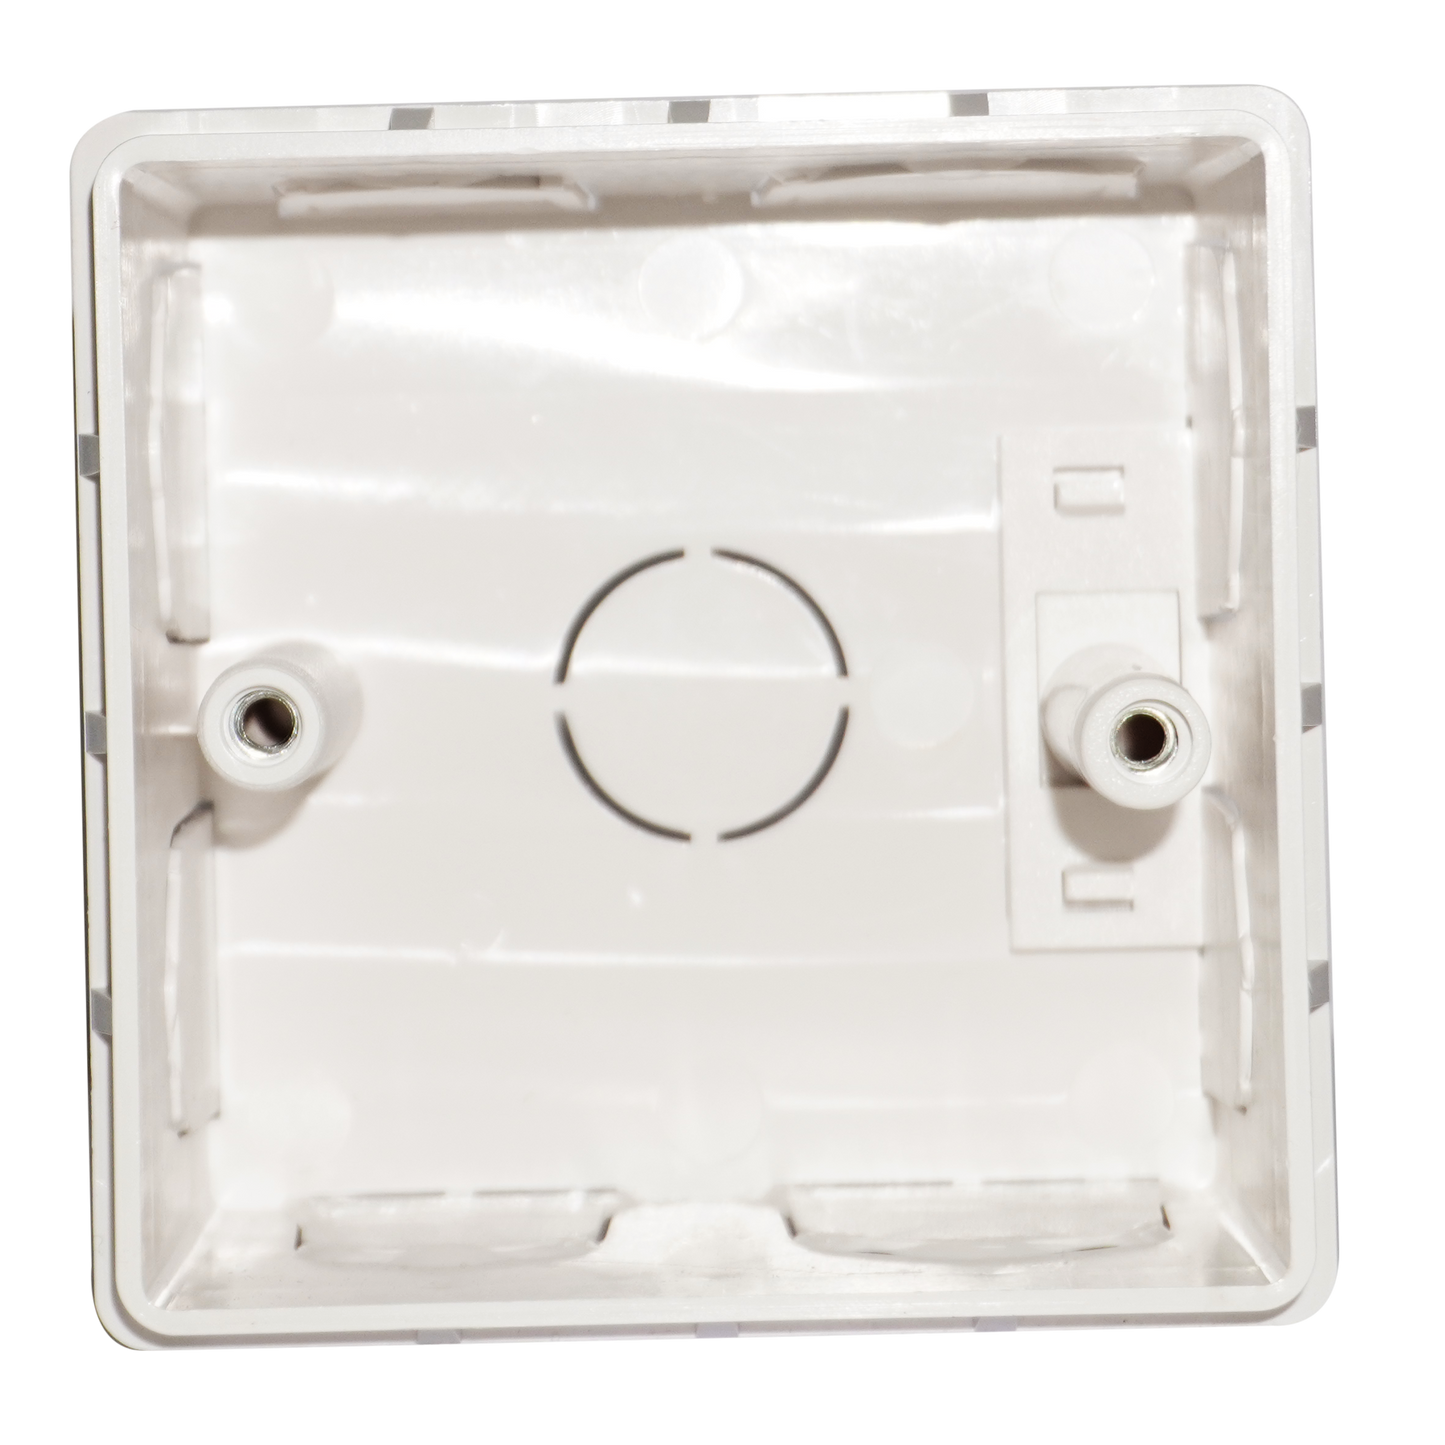 In-wall Mounting box for DM835.